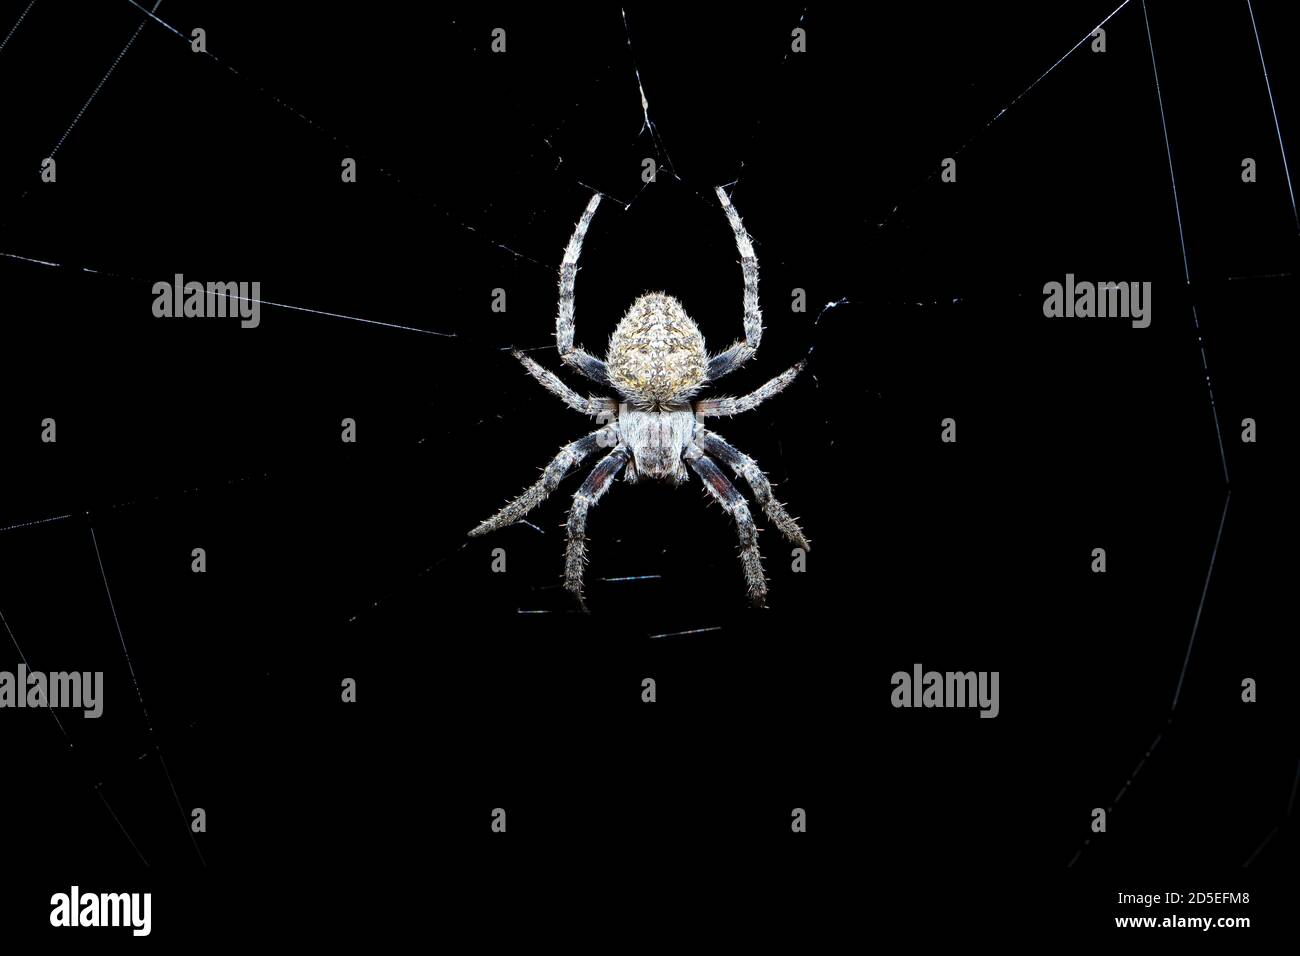 Small spider sitting in its web at night with a dark background Stock Photo